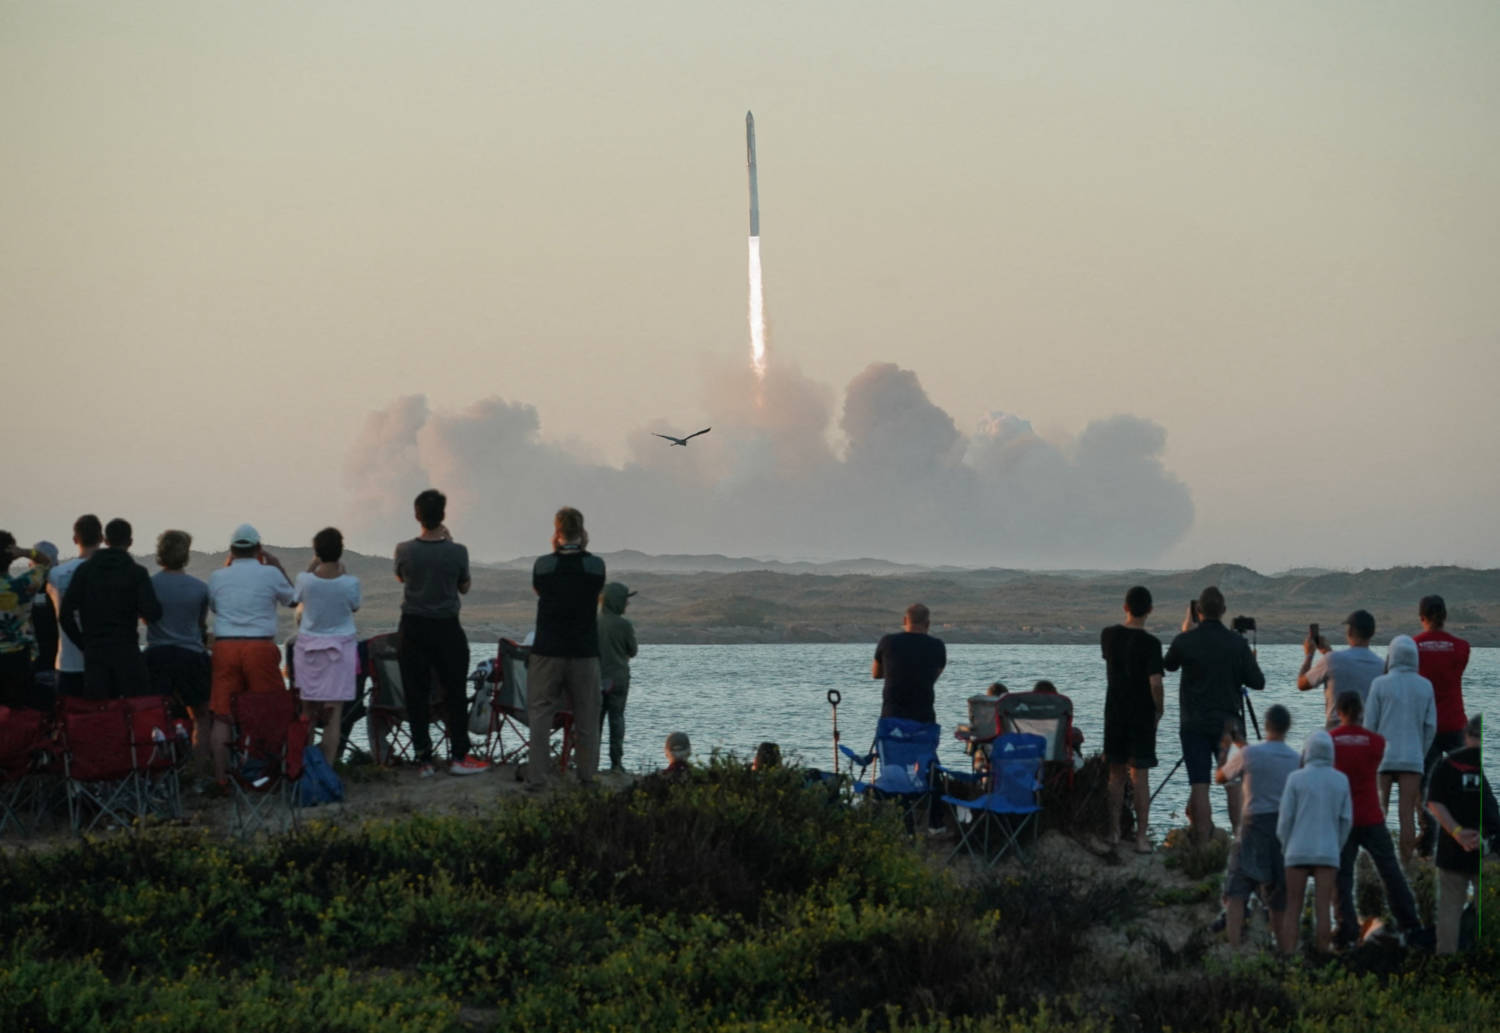 Spacex's Next Generation Starship Spacecraft Lifts Off From Launchpad, Near Brownsville